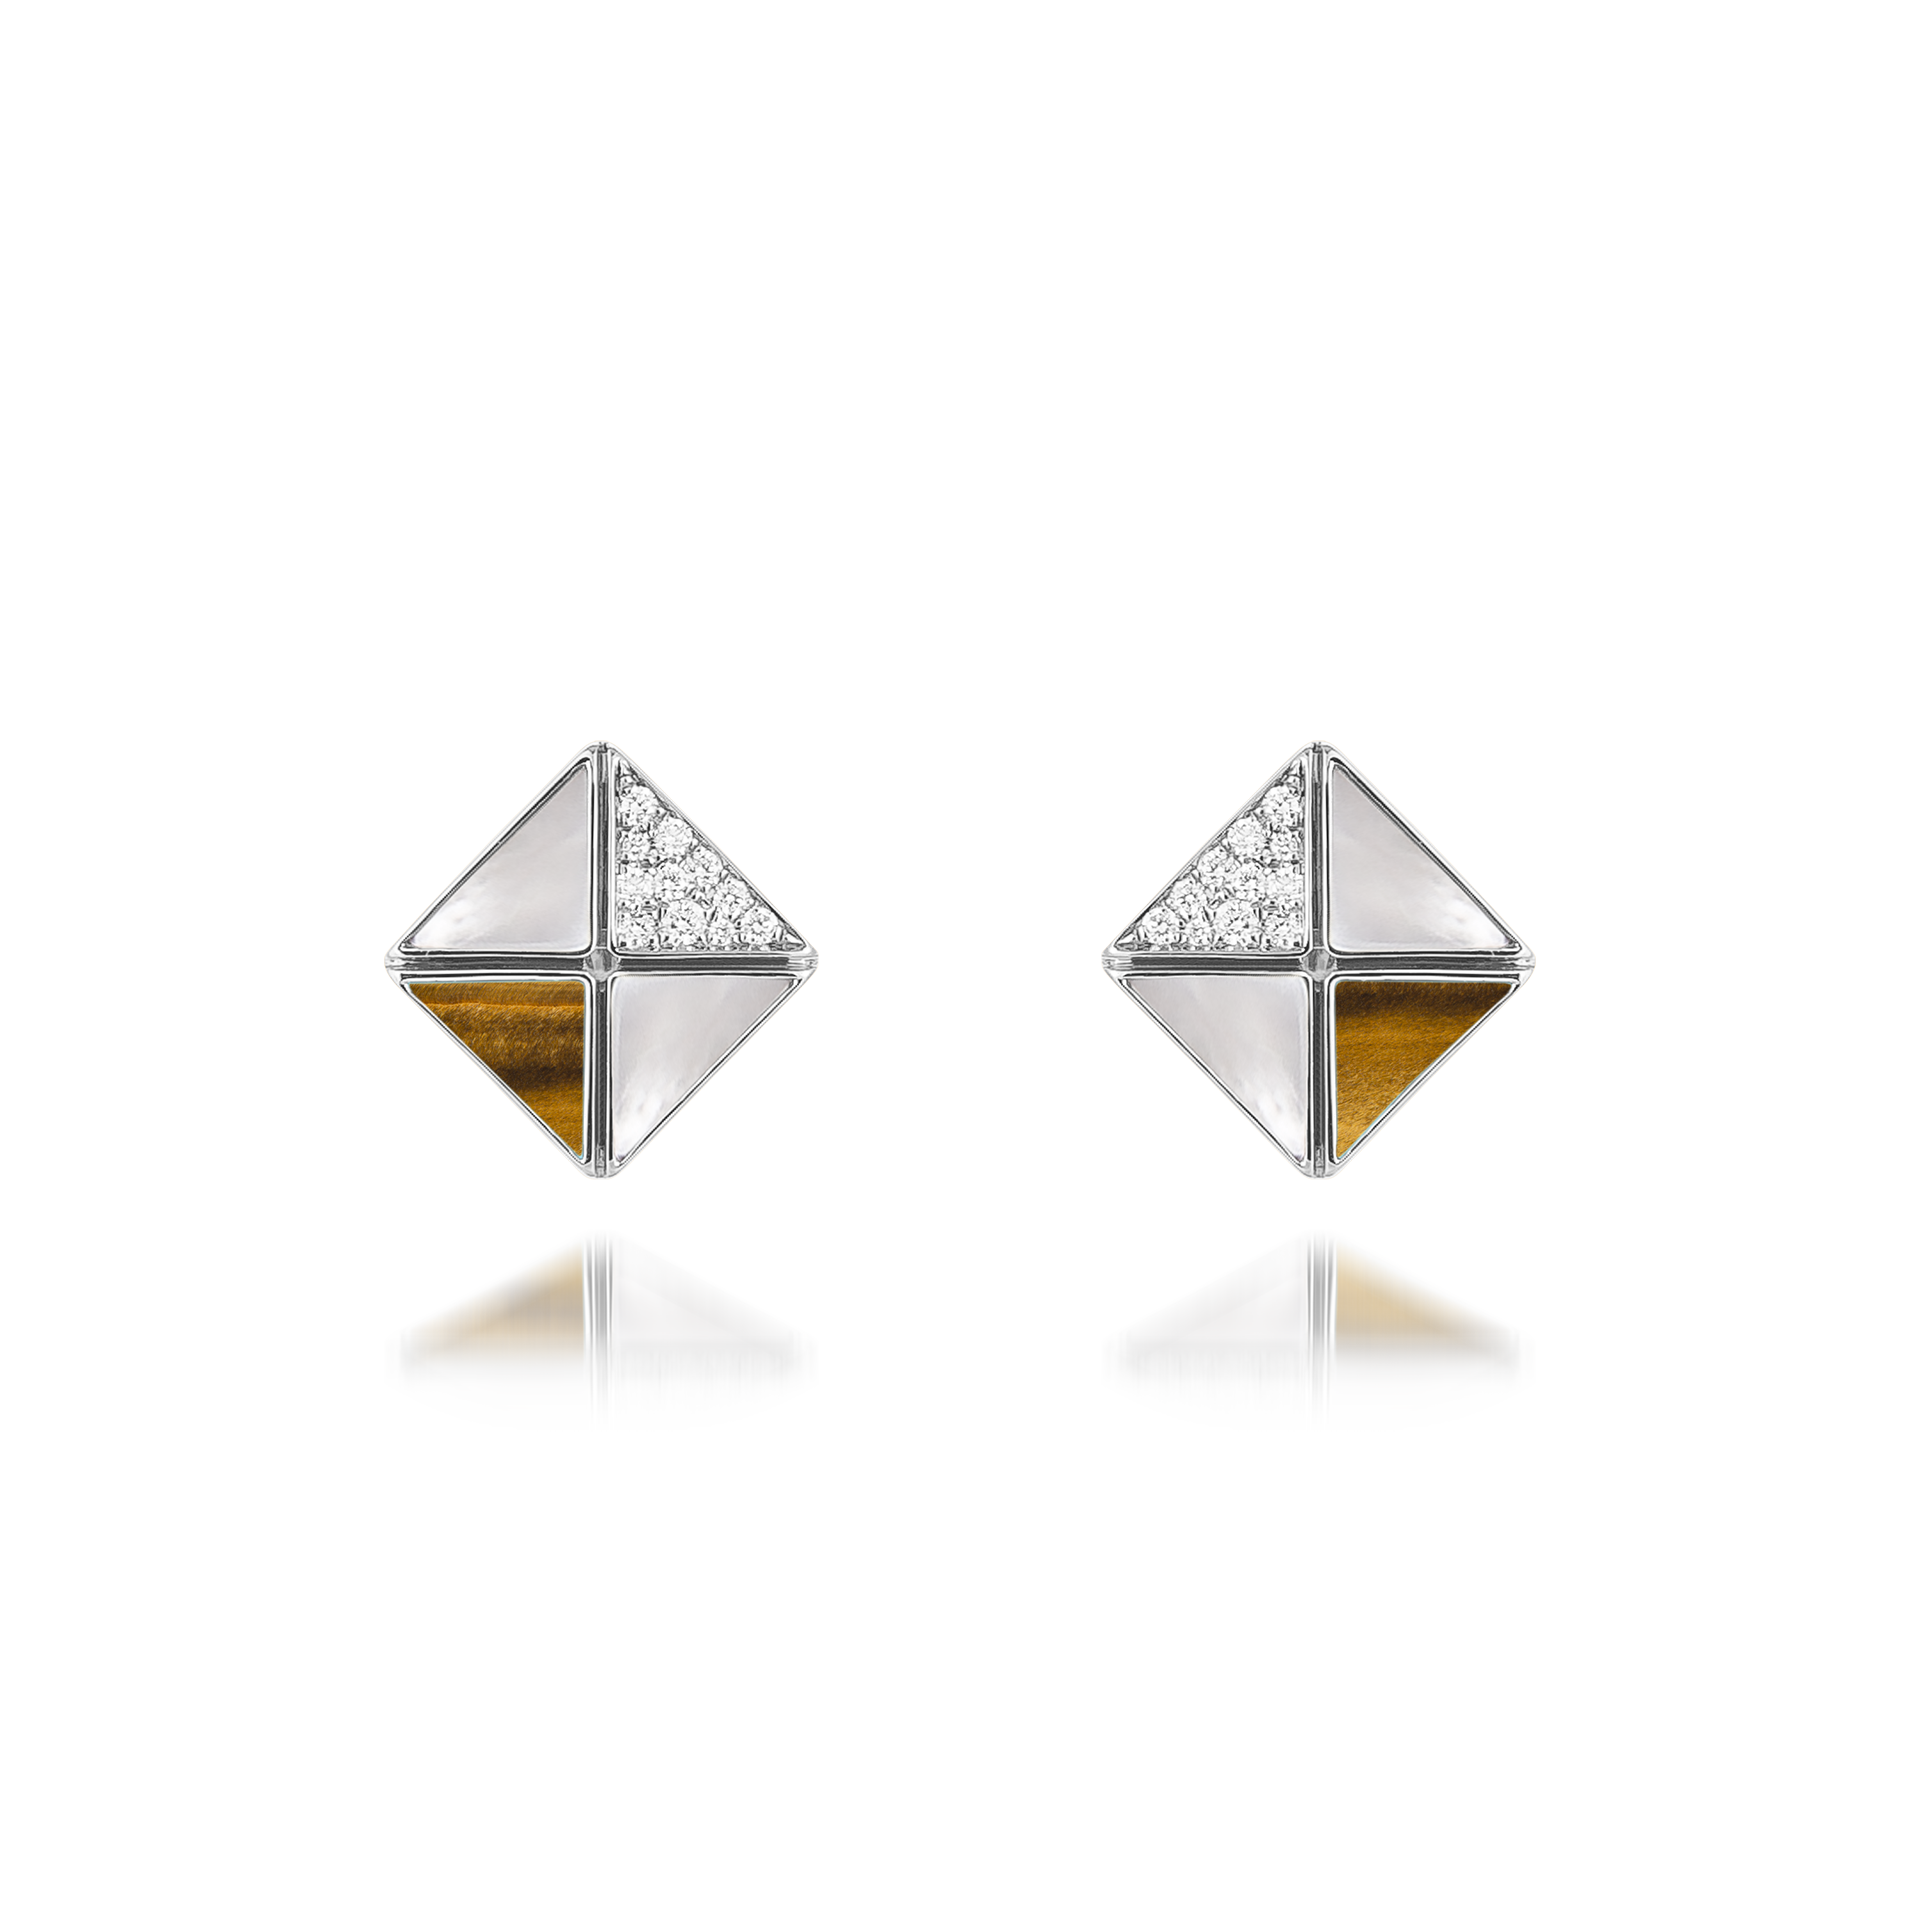 Deco Quadratic Studs with Tiger Eye, White Mother of Pearl and Diamonds In 18K White Gold